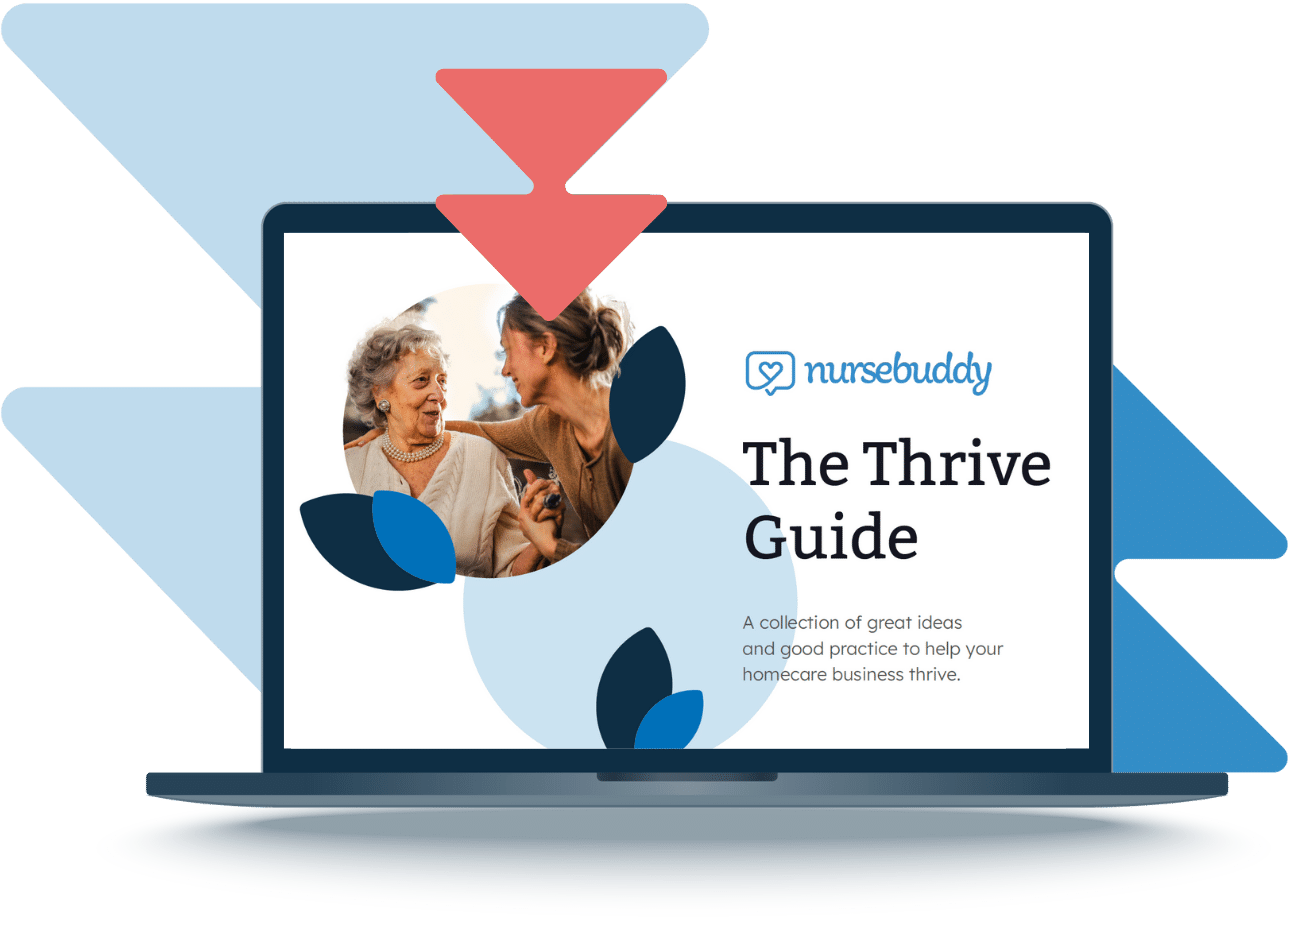 The Thrive Guide